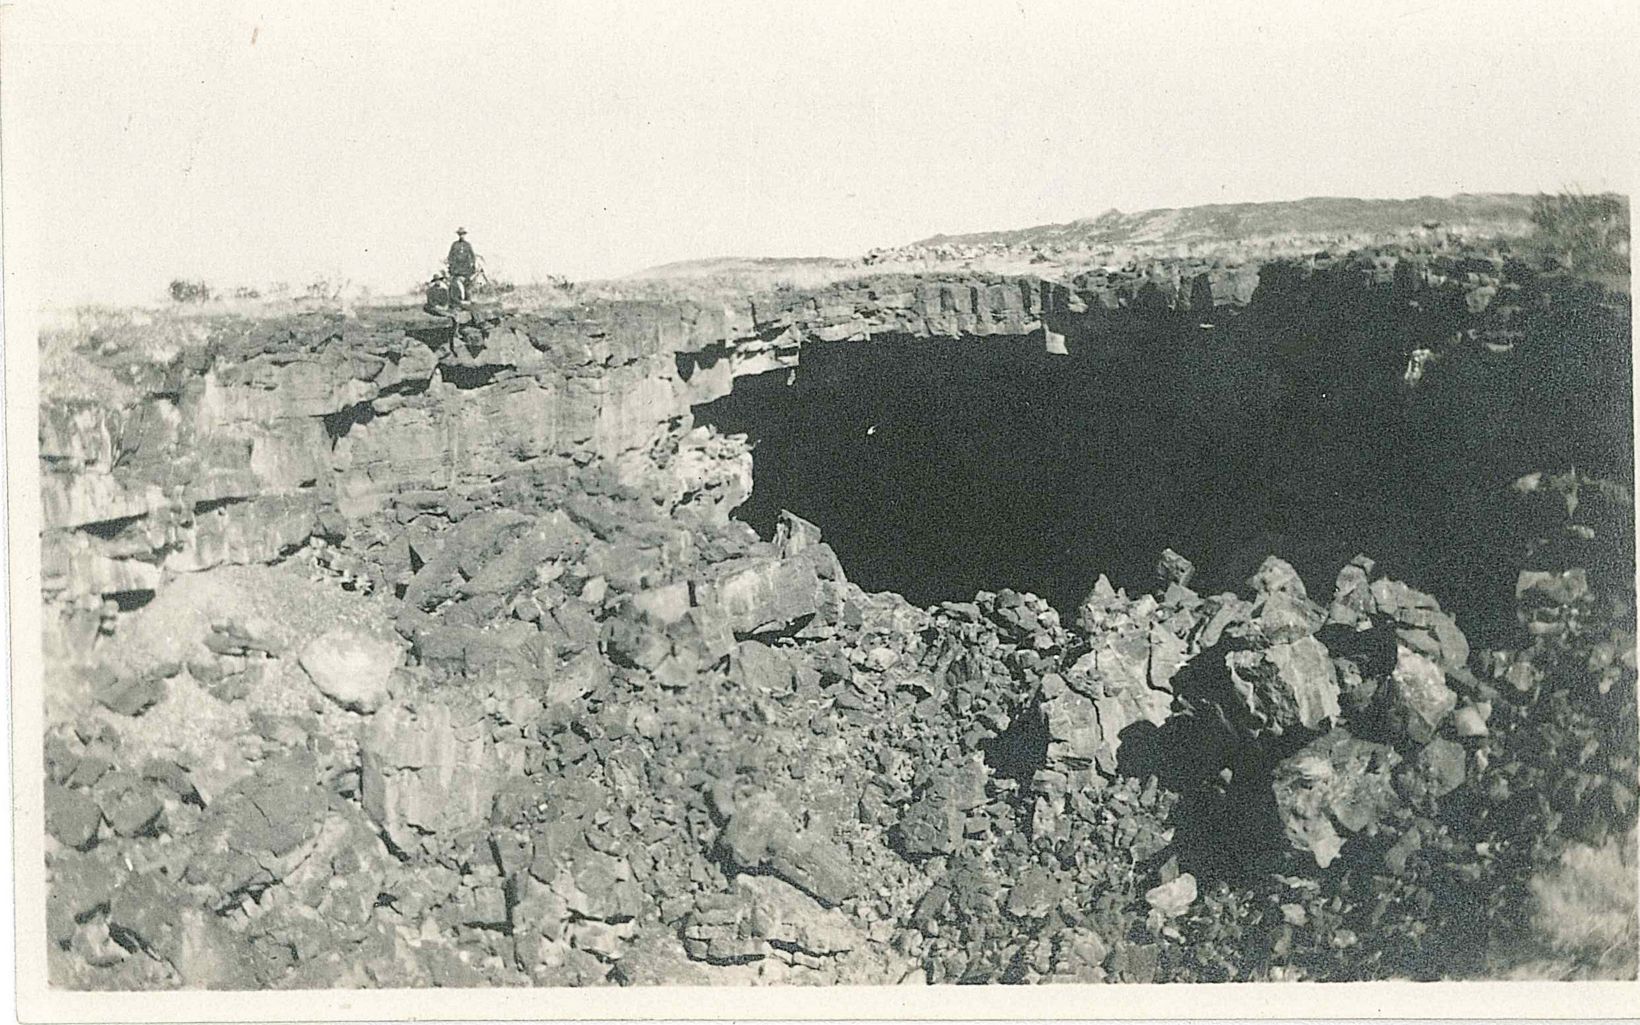 This photo was taken in 1915 for use in “Economic Geology of the Pedro Armendaris Land Grant in South Central New Mexico.”